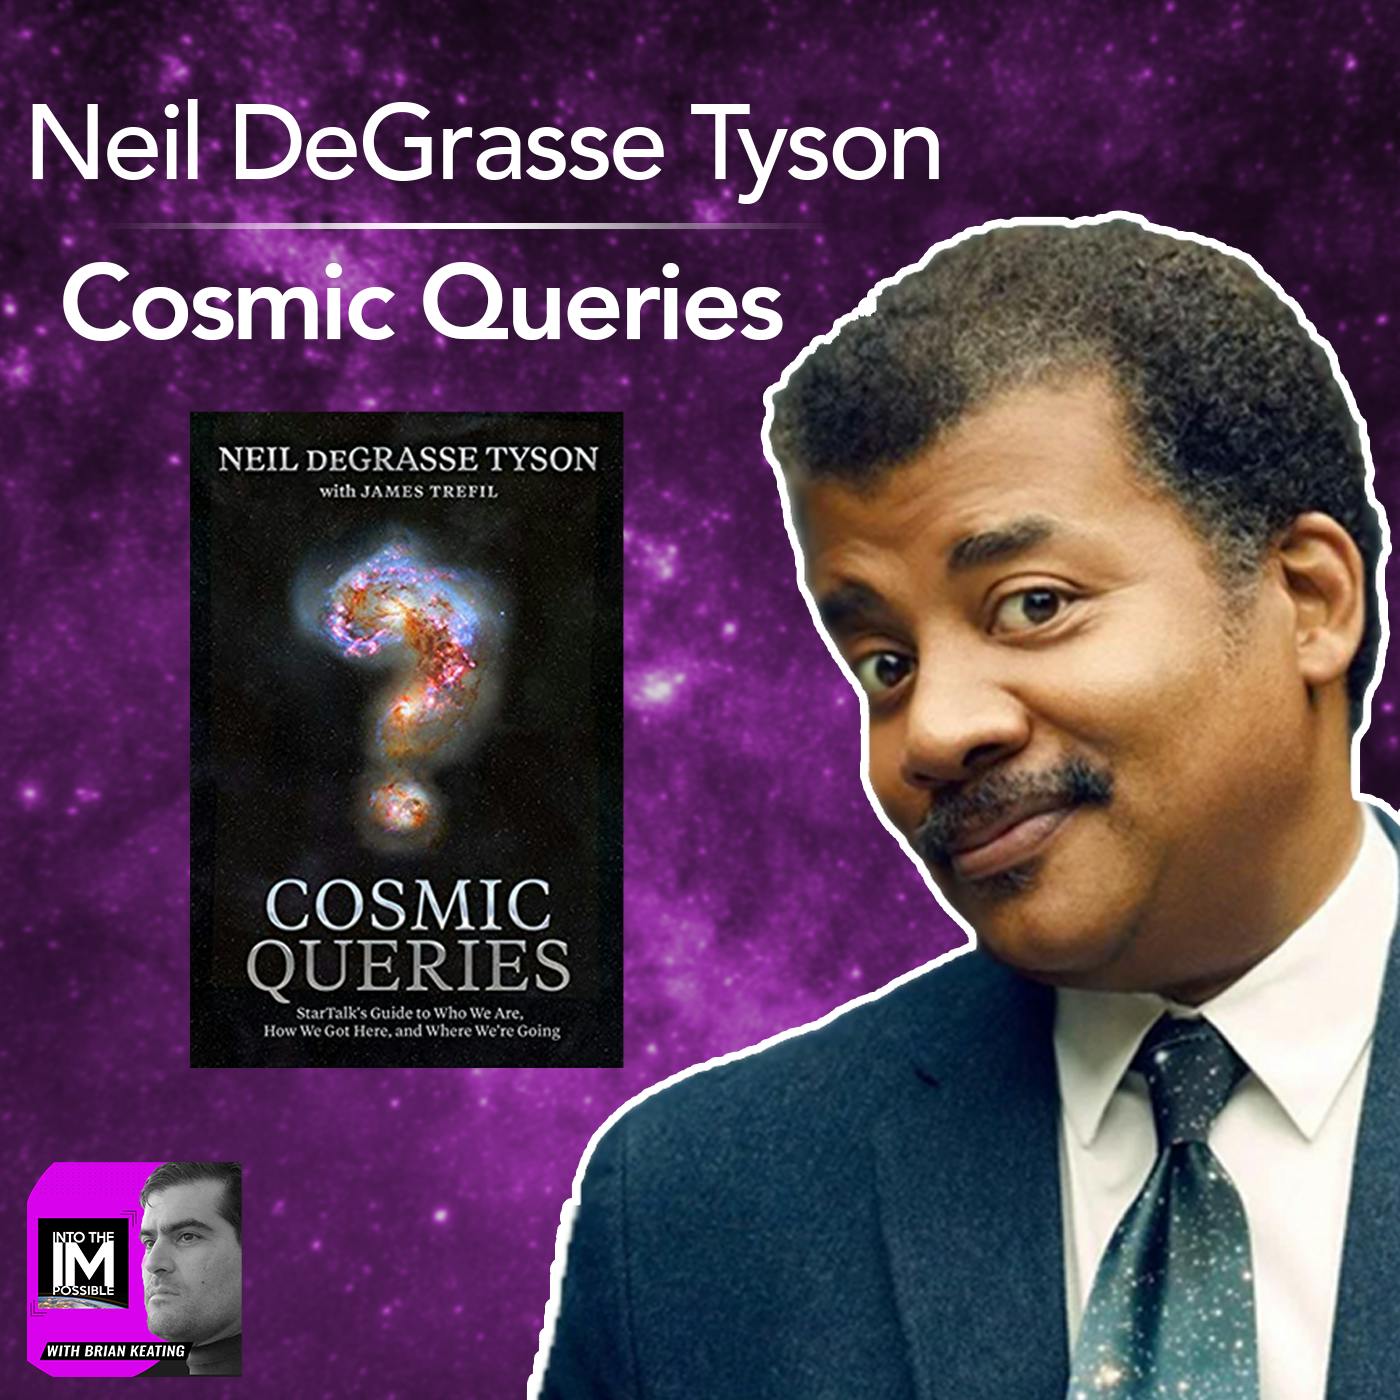 Neil DeGrasse Tyson: Who We Are, How We Got Here, and Where We’re Going (#136)